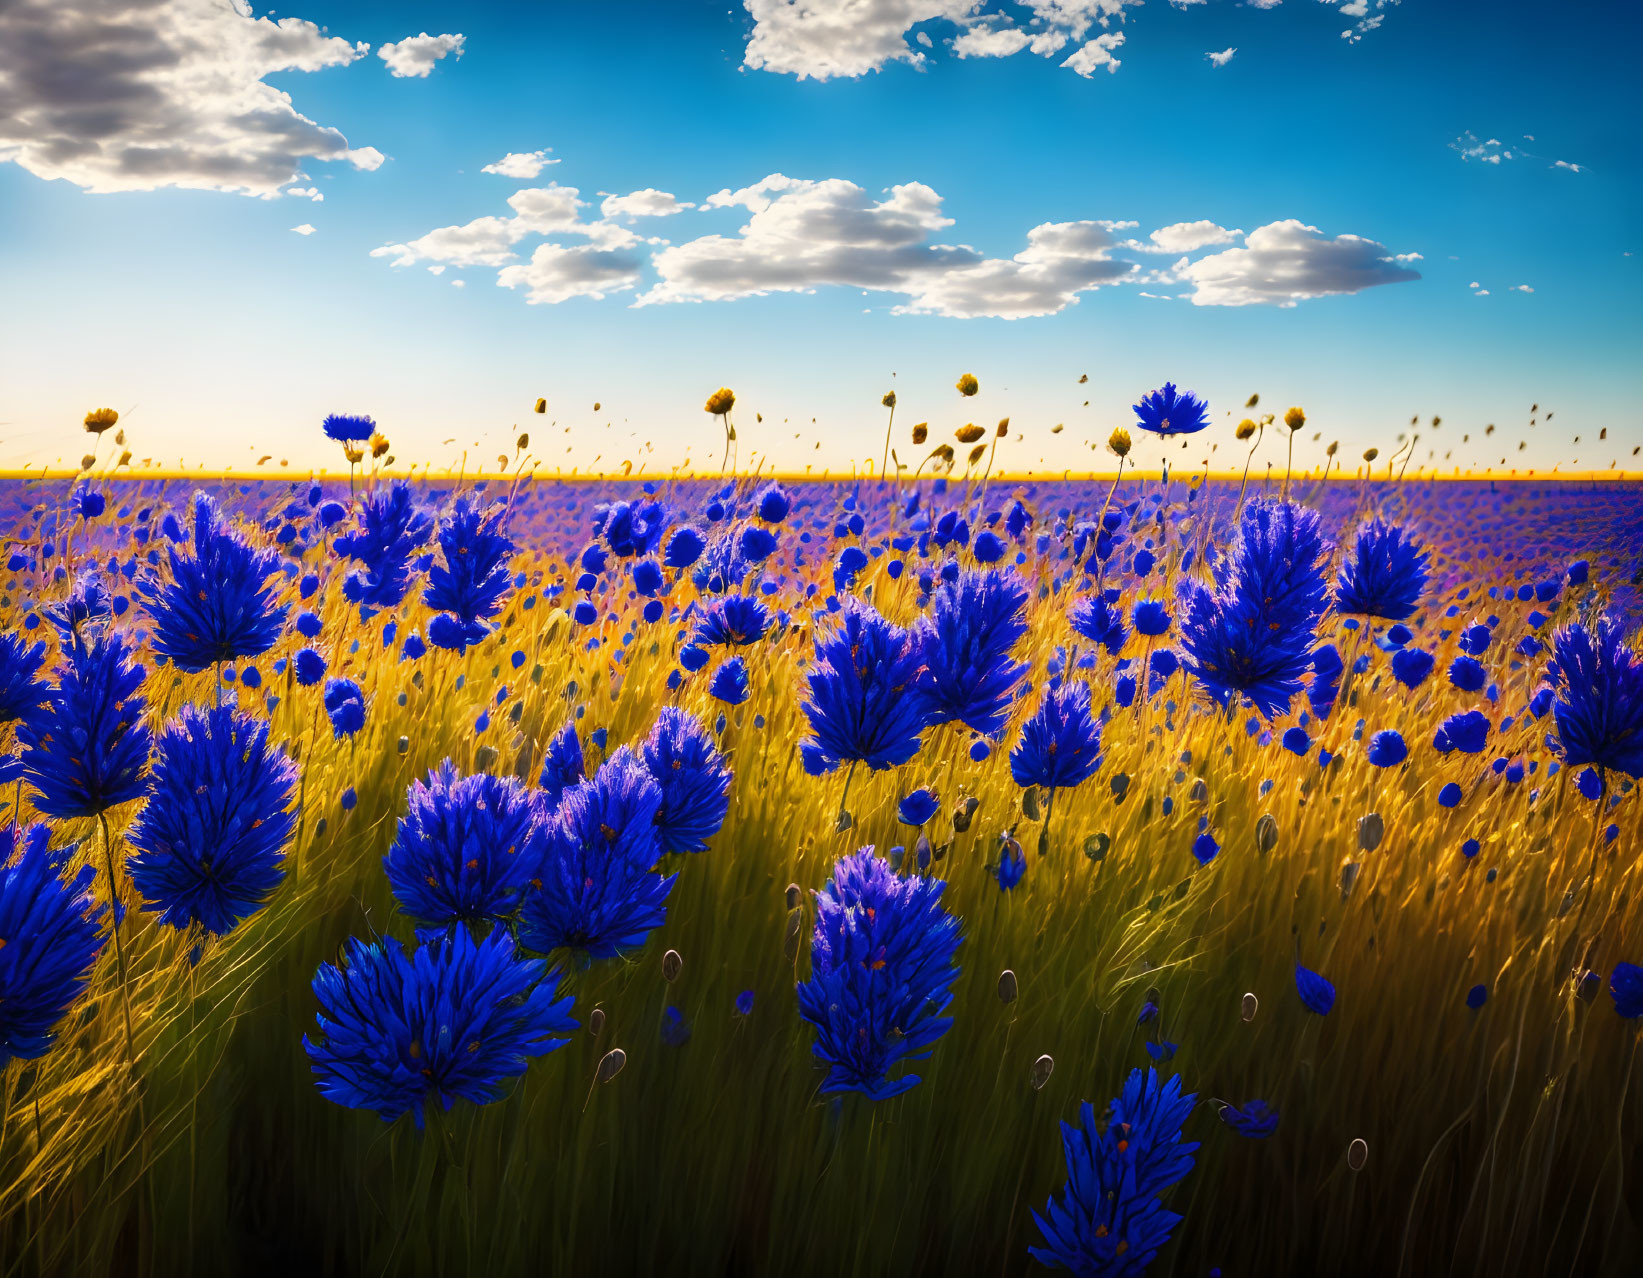 Colorful Blue and Purple Flower Field Under Dramatic Sky